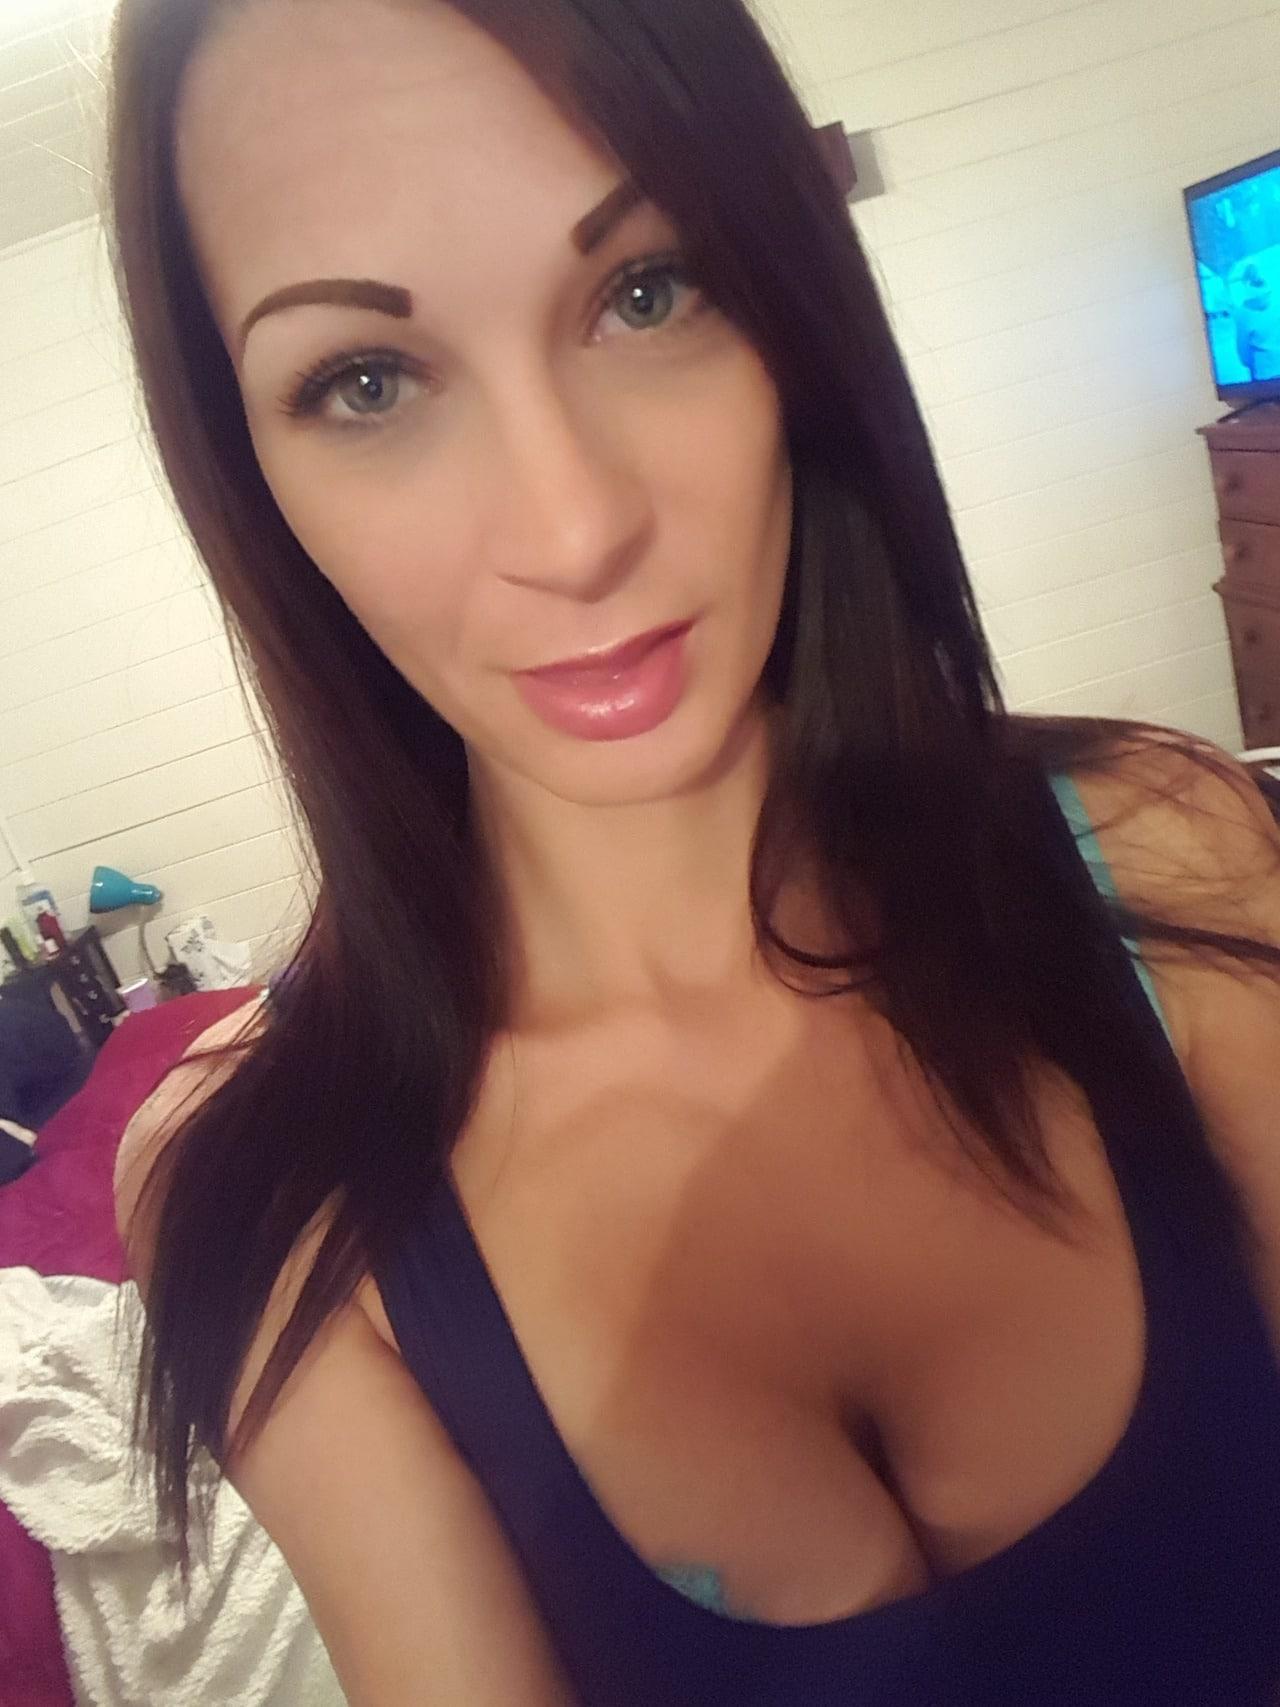 Have a fling with Lilianexxx on this Lancaster casual sex app